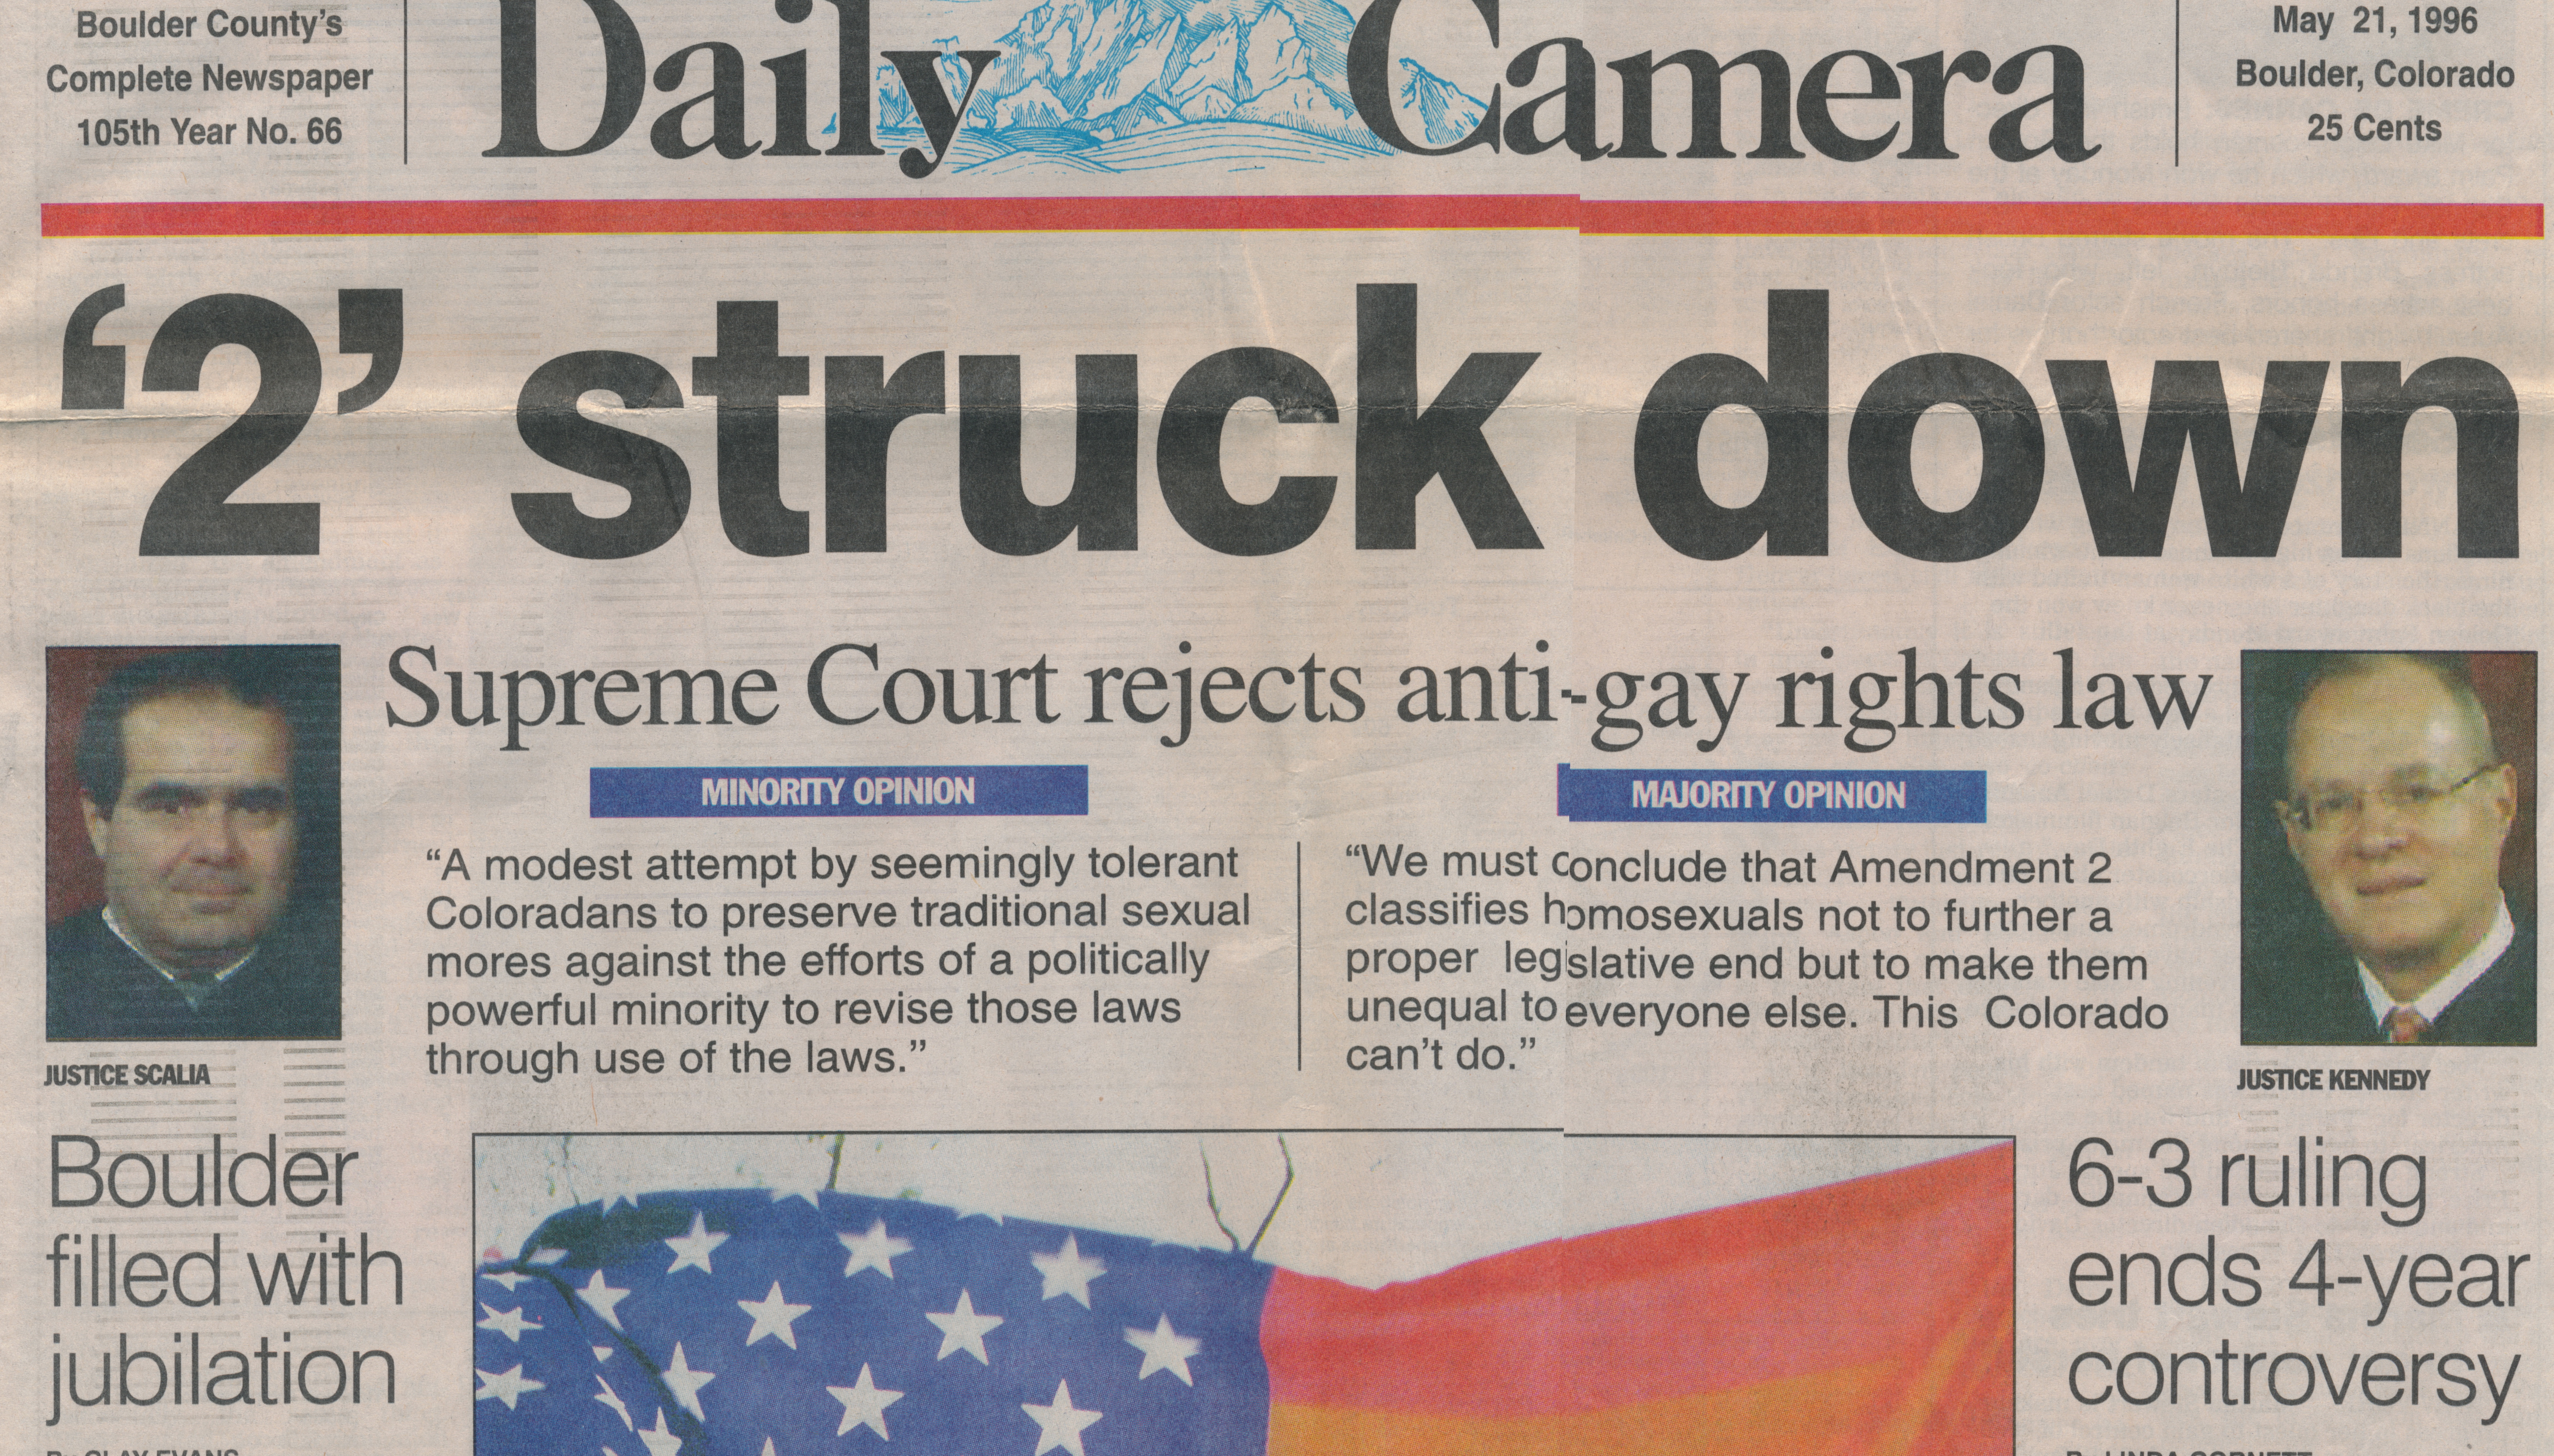 Image of Boulder Daily Camera newspaper headline, May 21, 1996. The headline reads "'2' struck down, Supreme Court rejects anti-gay rights law."